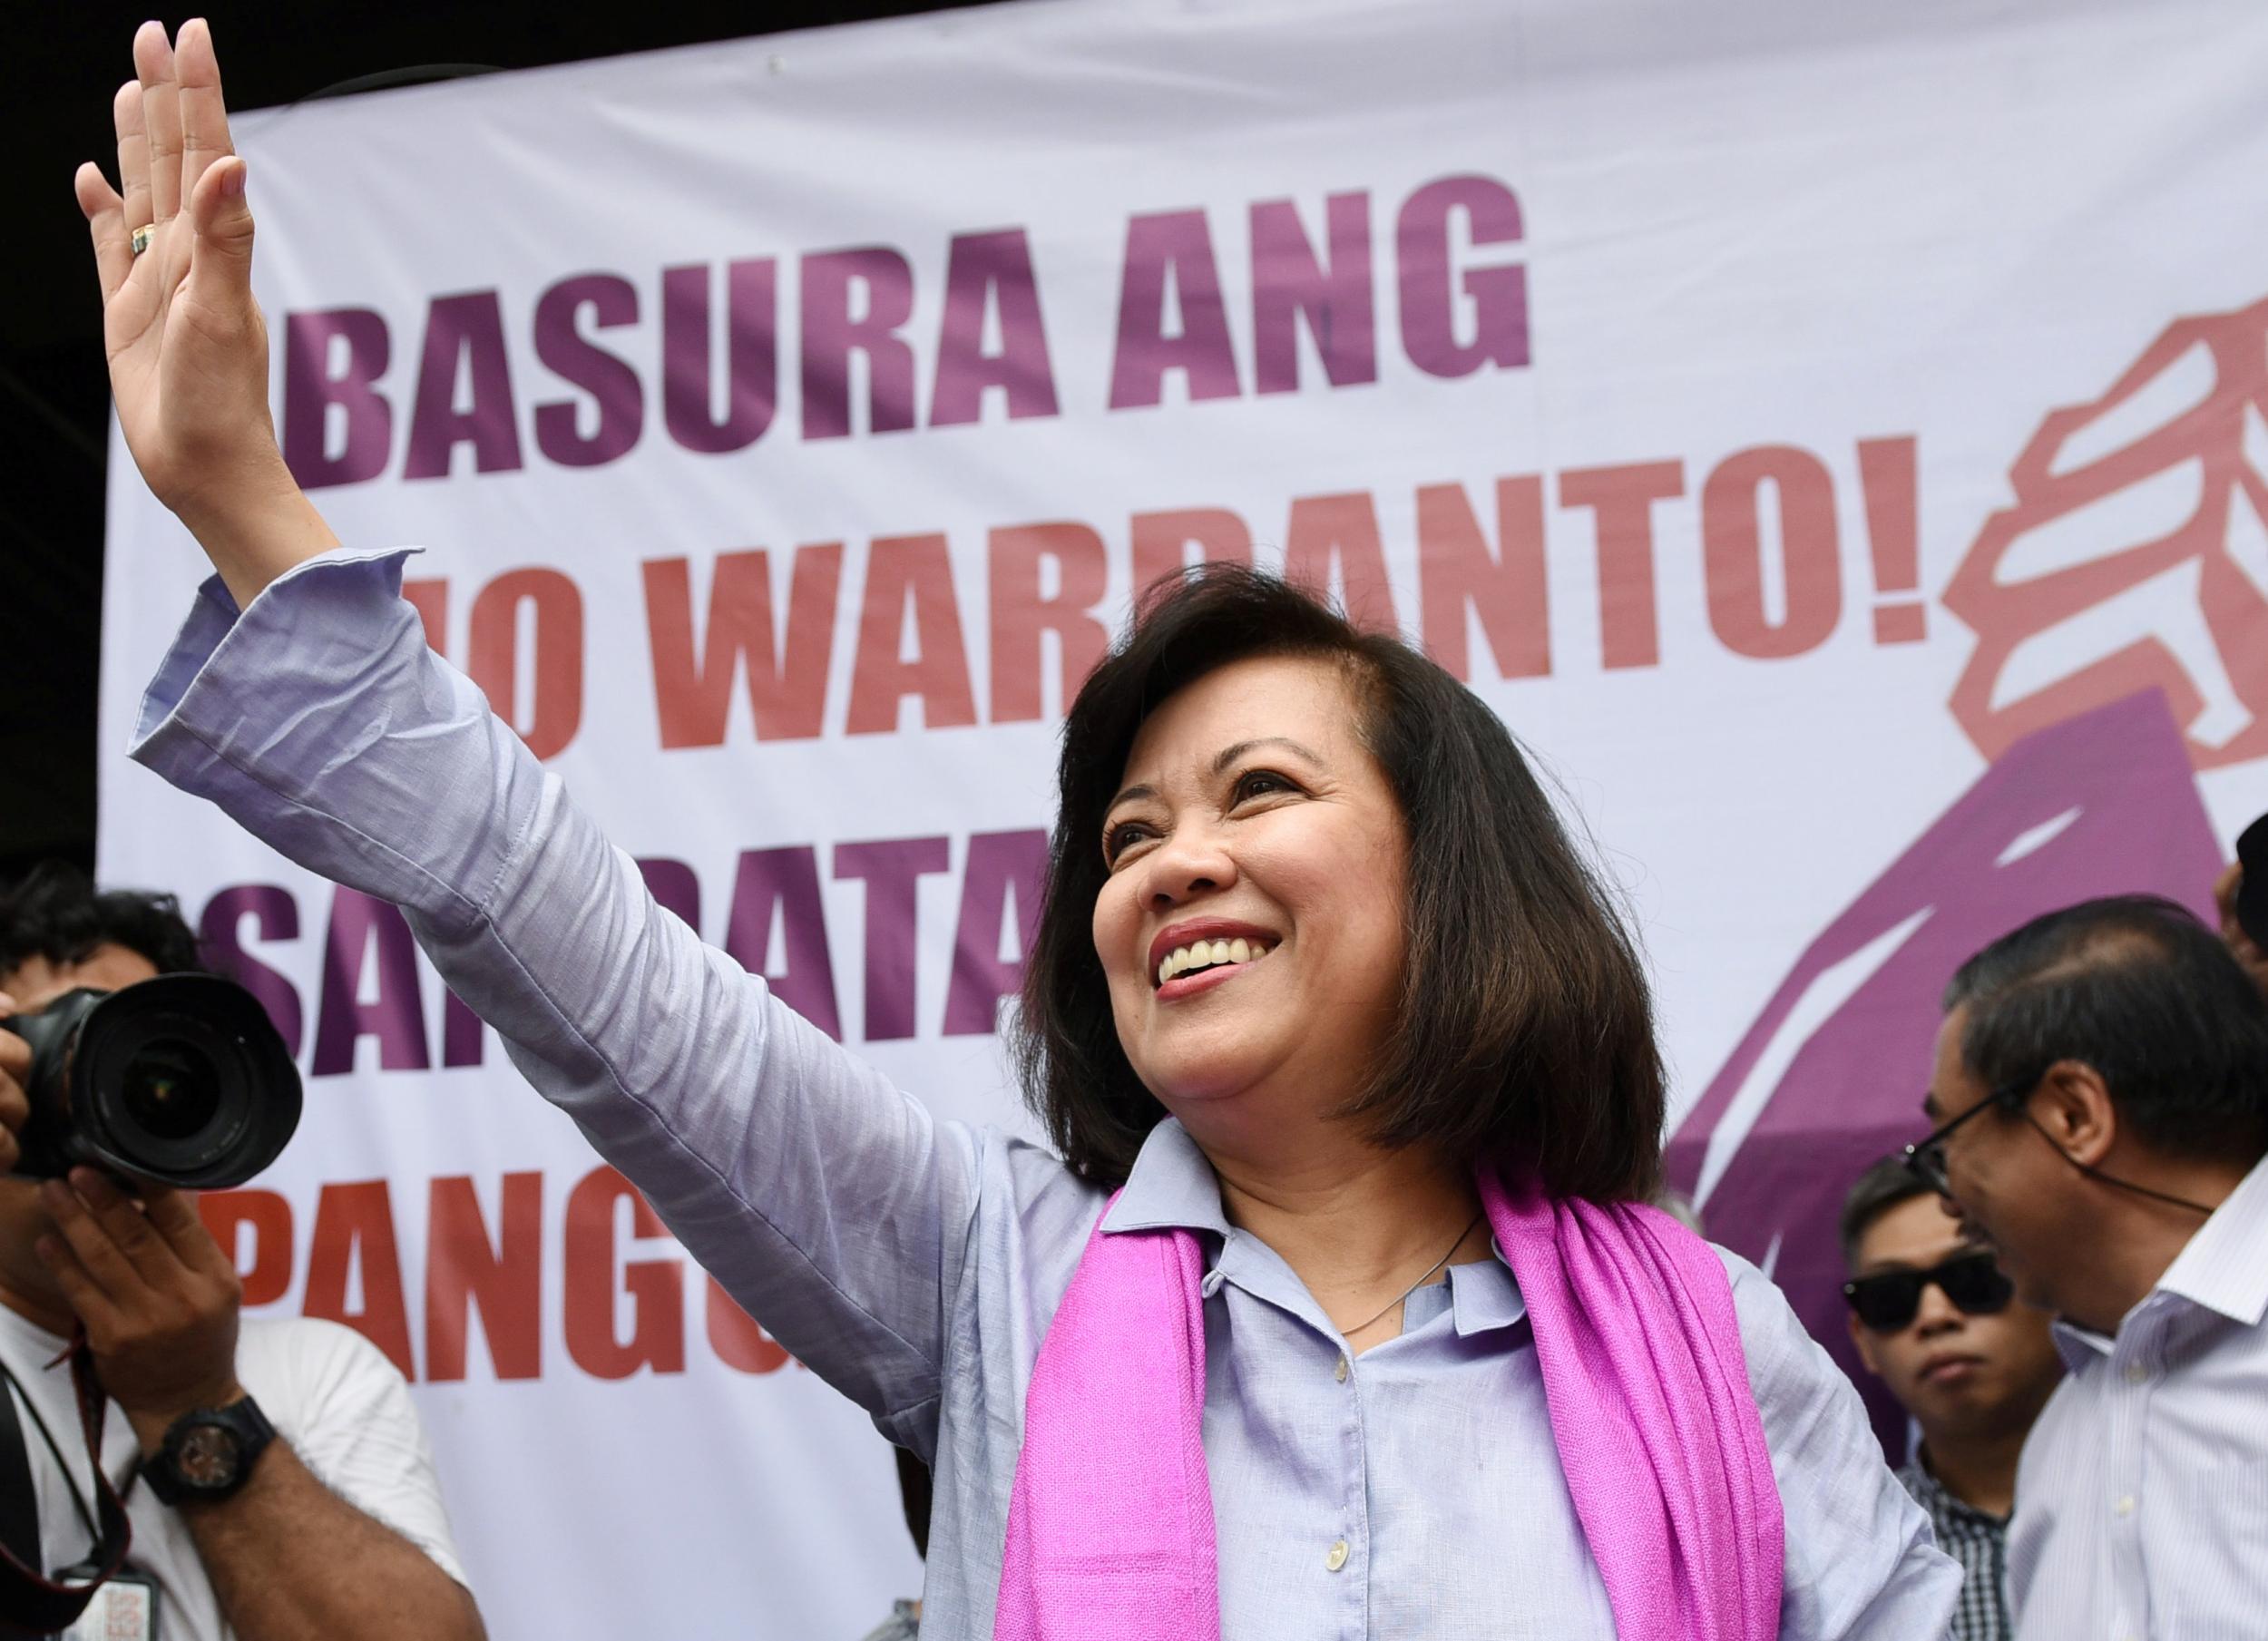 Maria Lourdes Sereno waves to supporters at a rally outside the supreme court in Manila